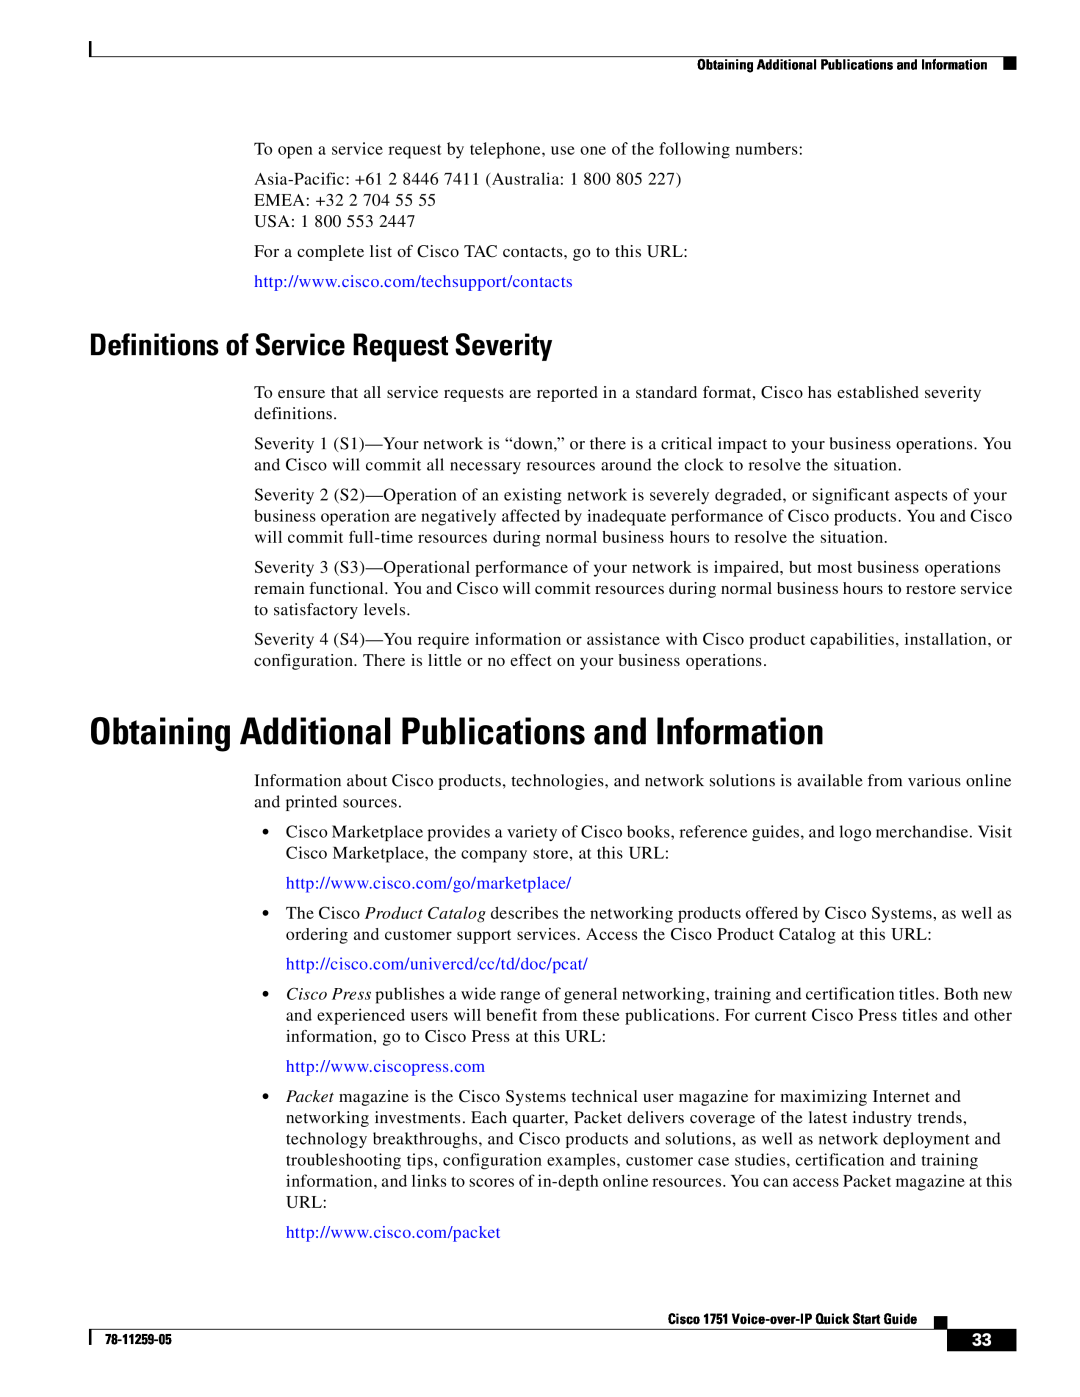 Cisco Systems CISCO1751 Obtaining Additional Publications and Information, Definitions of Service Request Severity 